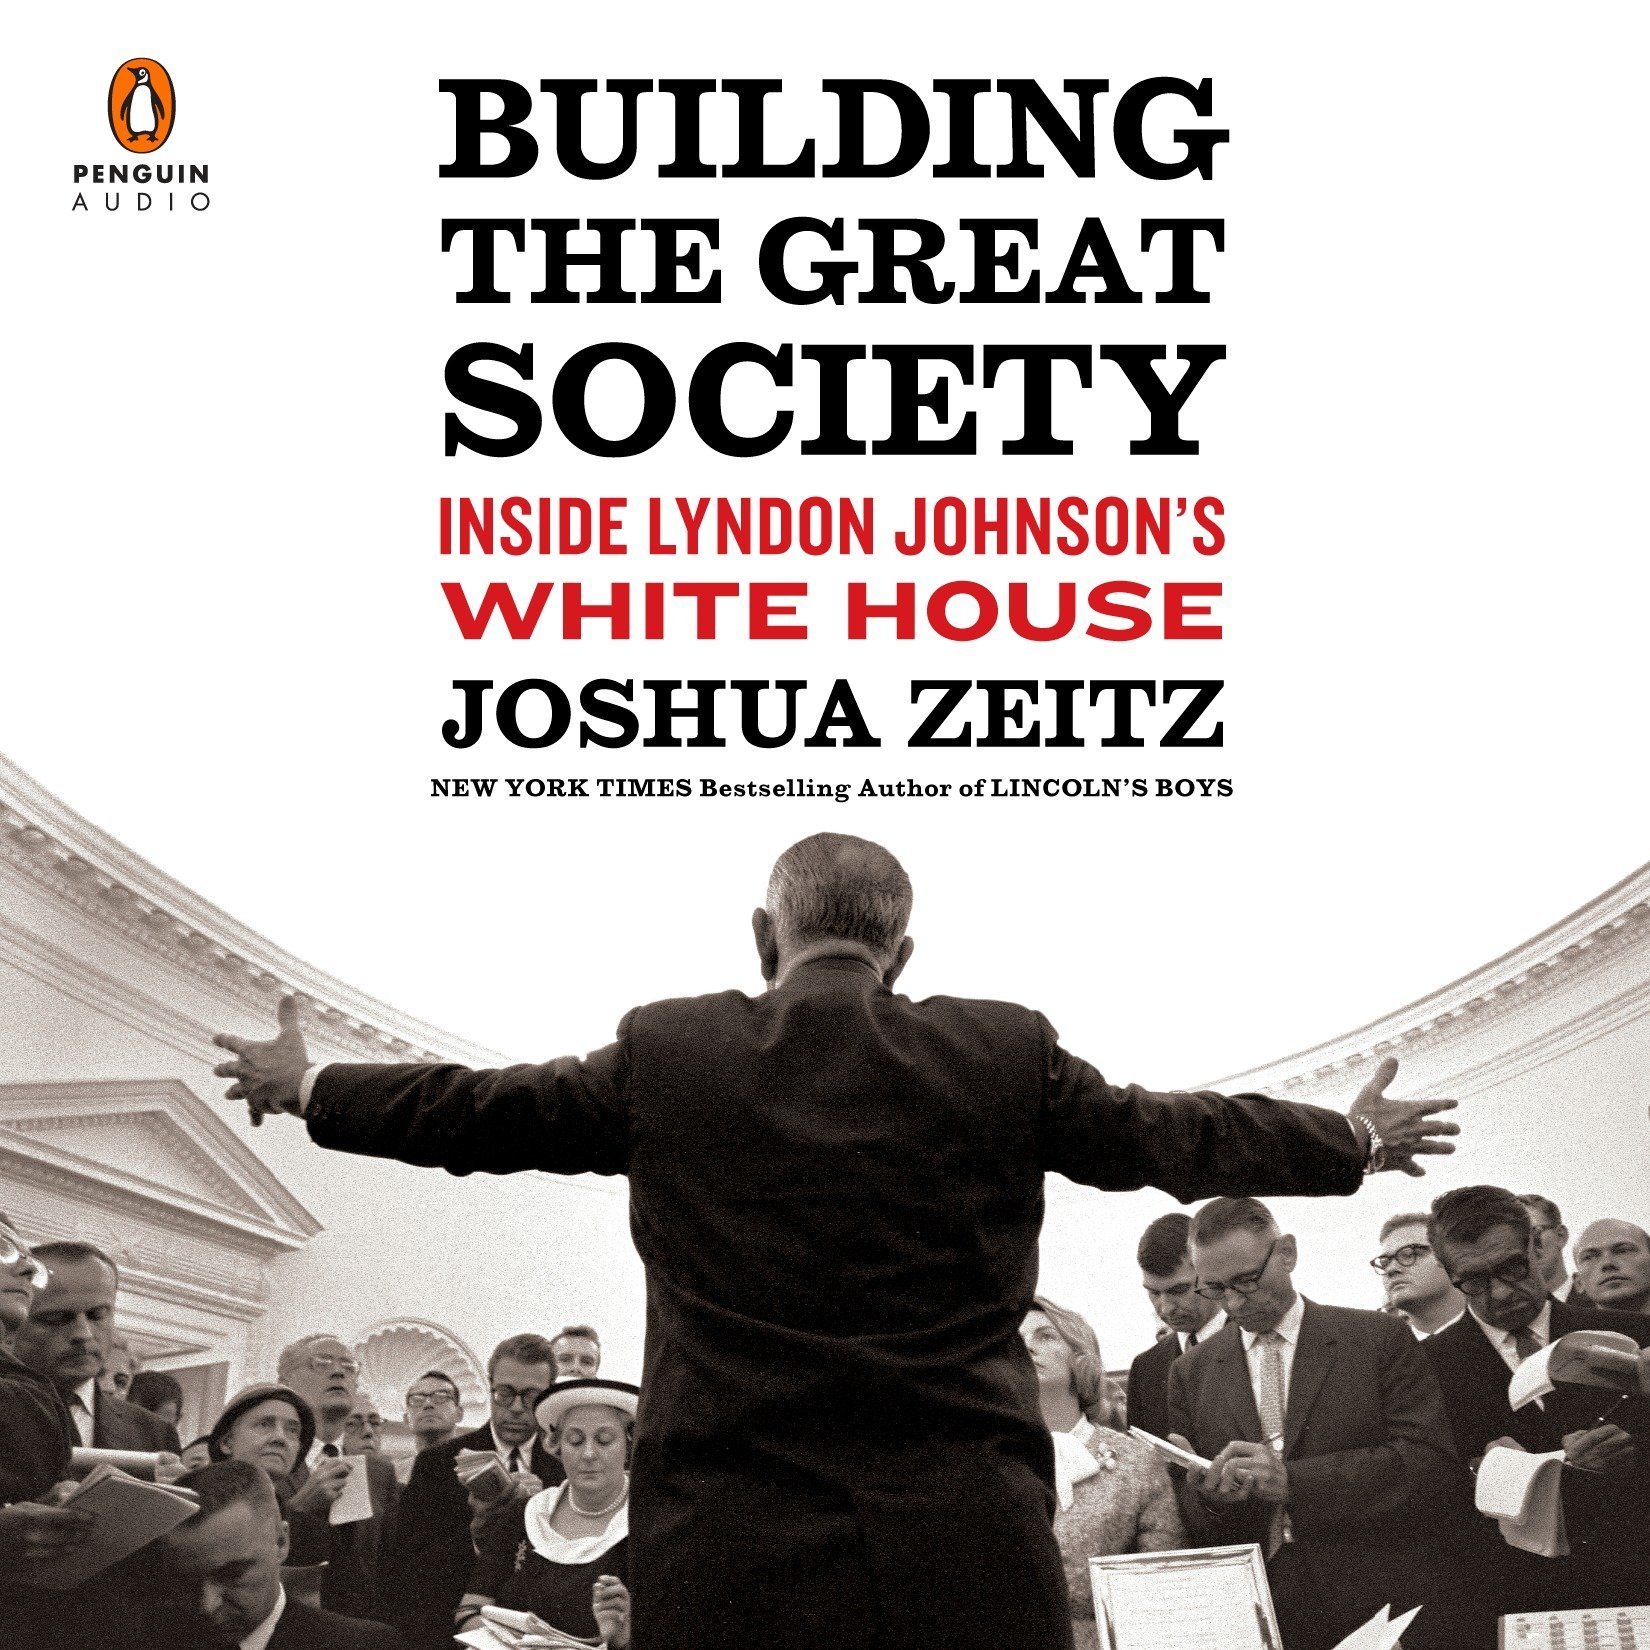 The great society. Inside the White House книга. Books about Society. Lets keep building the great Society.